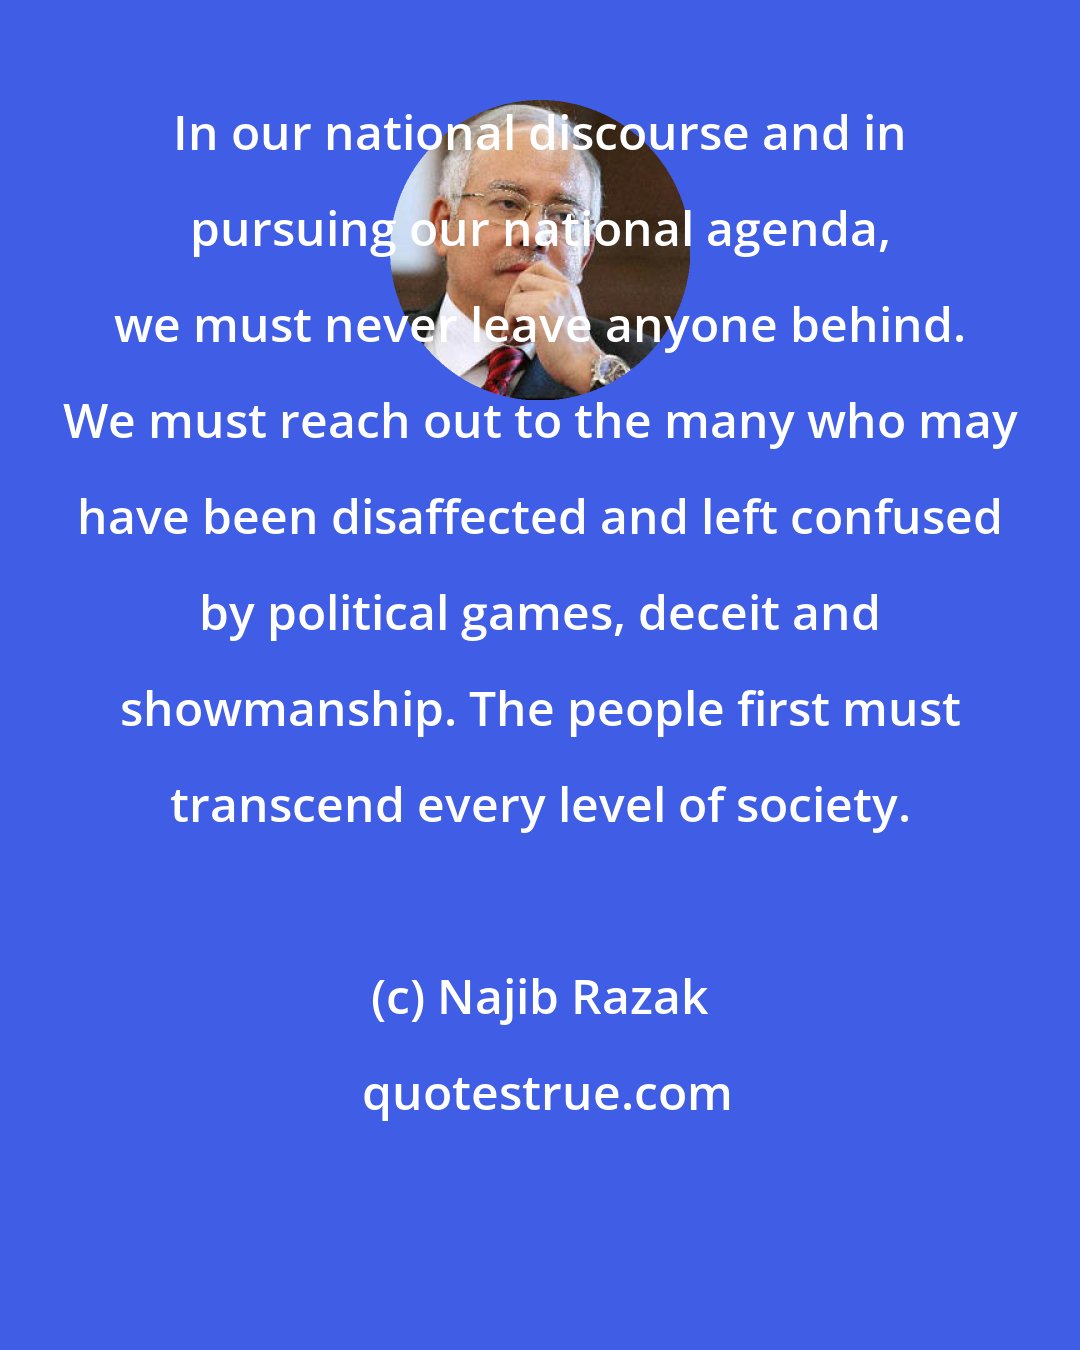 Najib Razak: In our national discourse and in pursuing our national agenda, we must never leave anyone behind. We must reach out to the many who may have been disaffected and left confused by political games, deceit and showmanship. The people first must transcend every level of society.